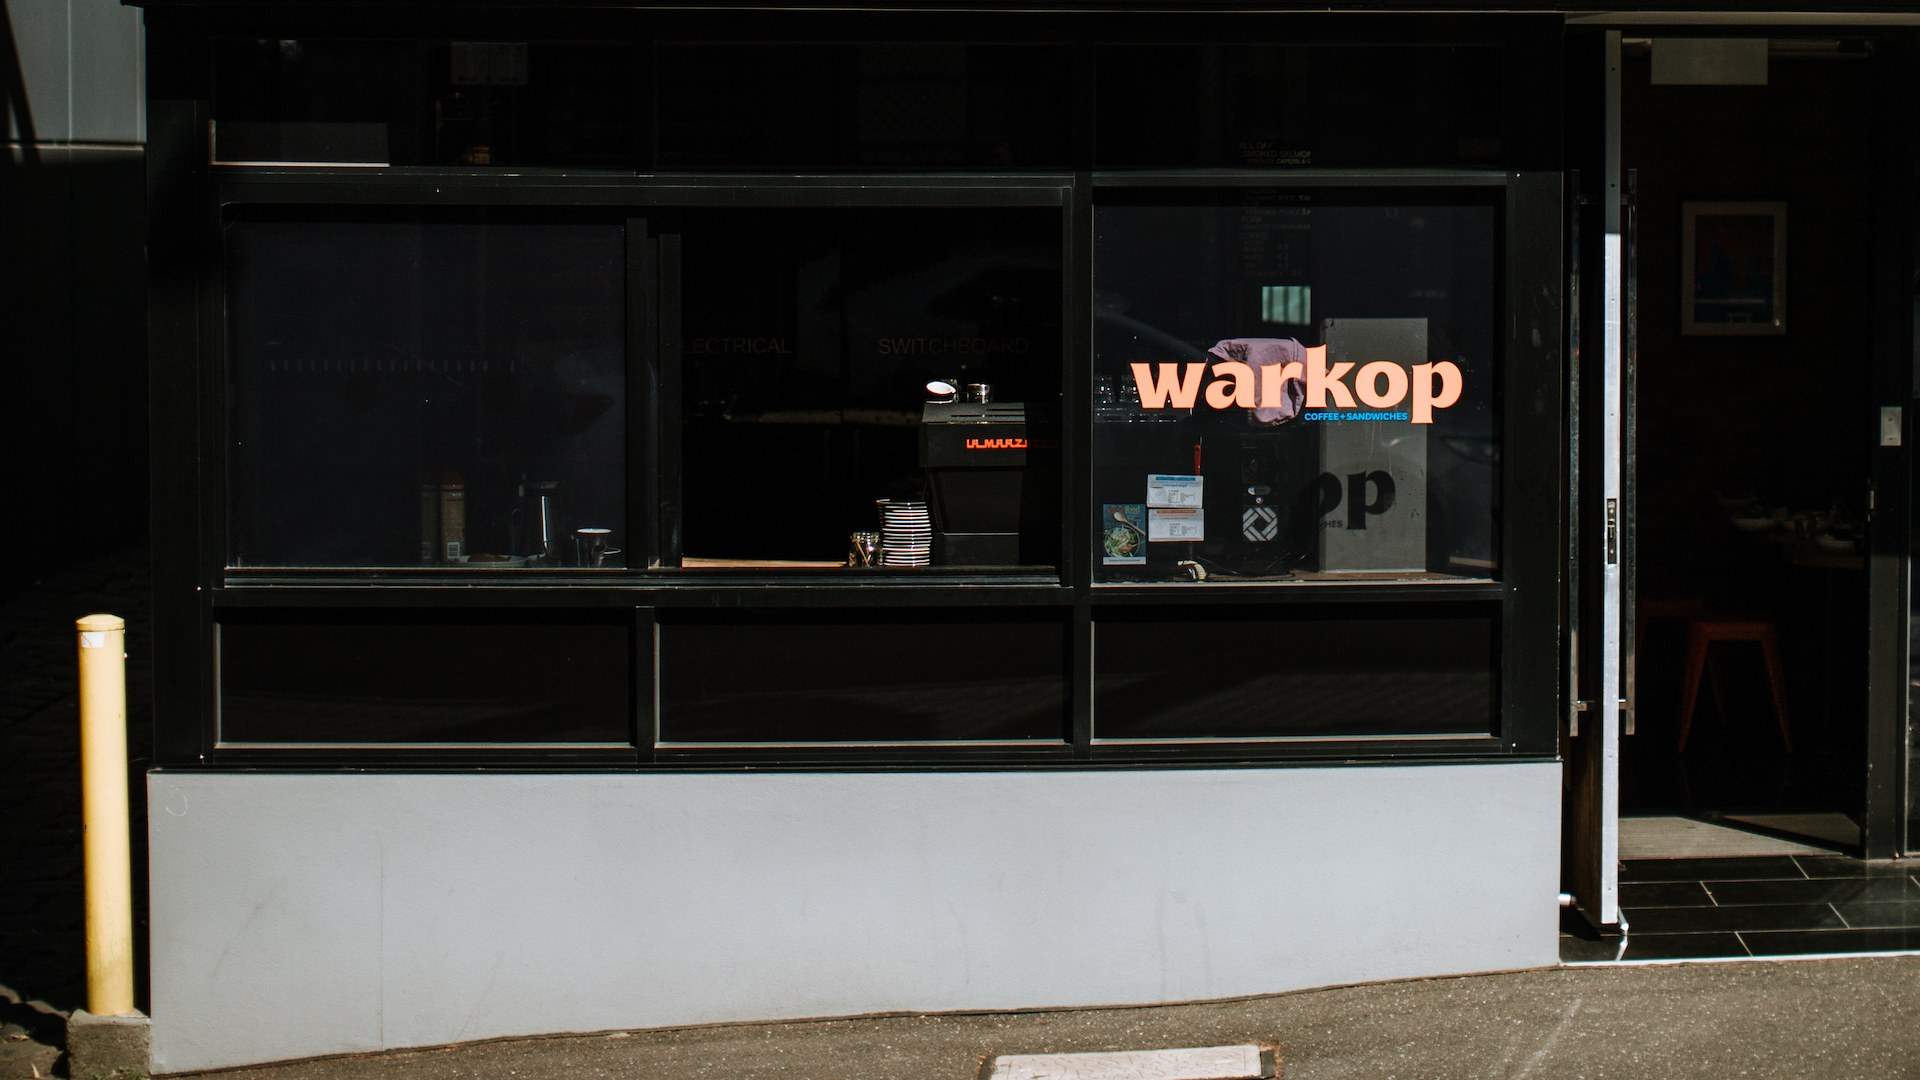 Warkop Is Richmond's New 15-Seater Cafe Serving Indonesian-Inspired Sandwiches